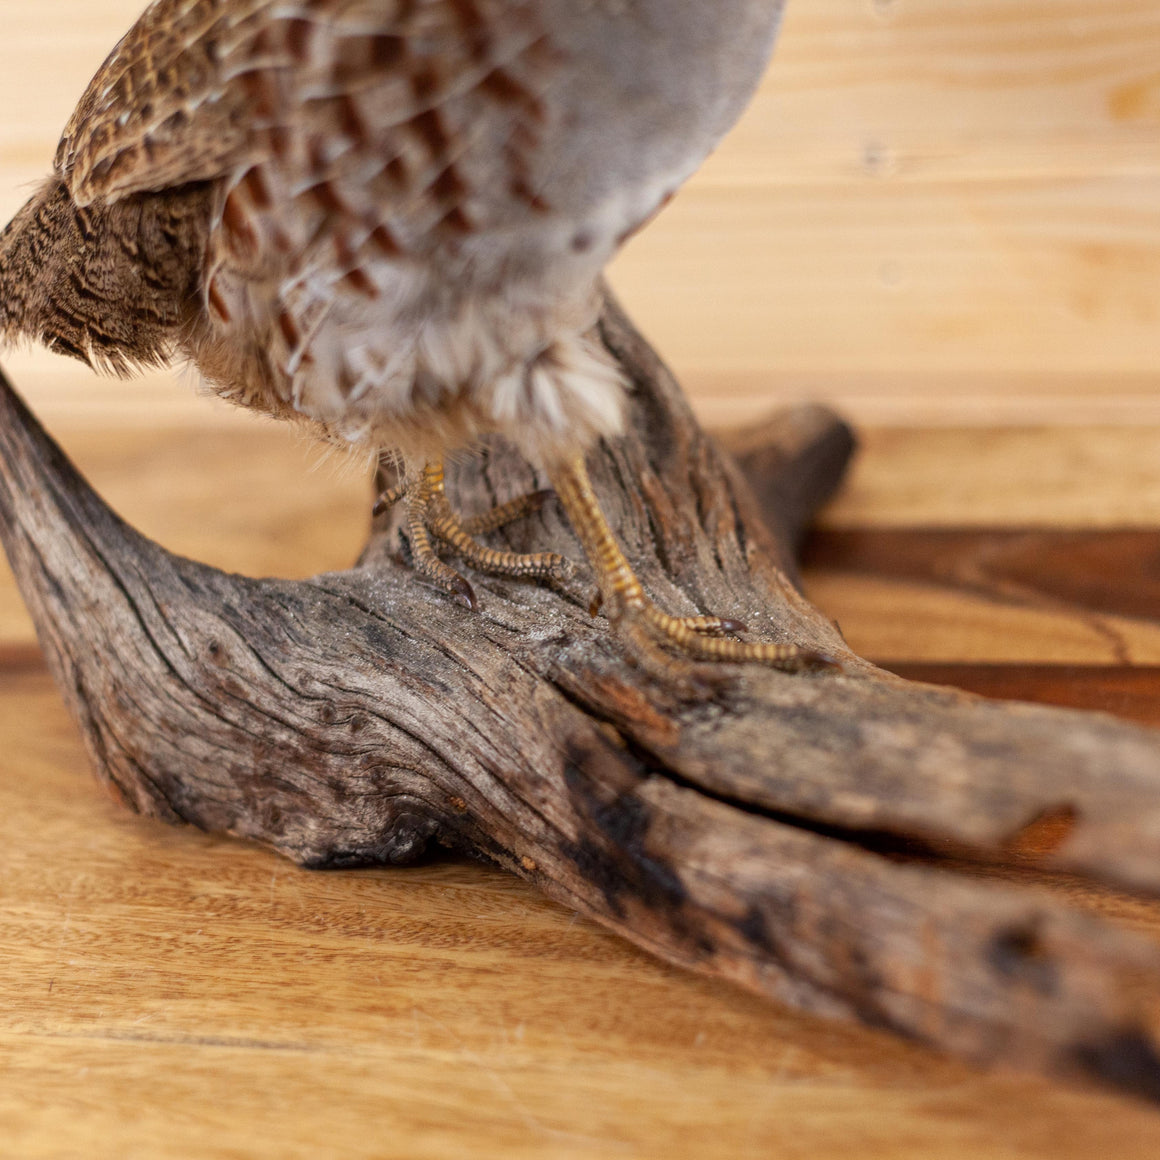 Carved Driftwood Branch with Bird Accents